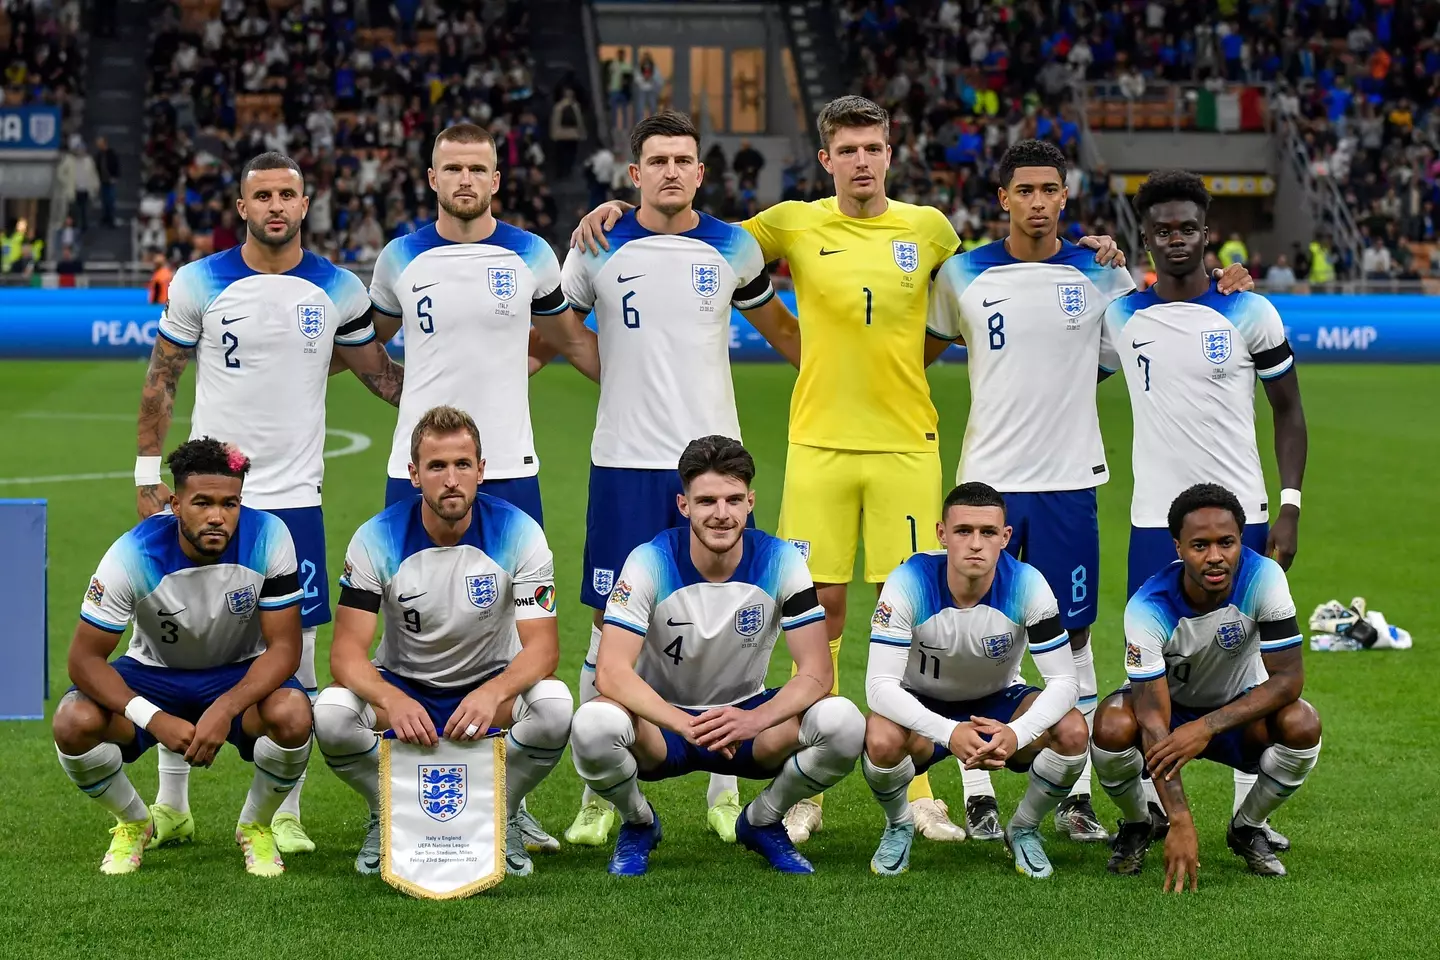 England's players before a 1-0 defeat to Italy in September. (Image